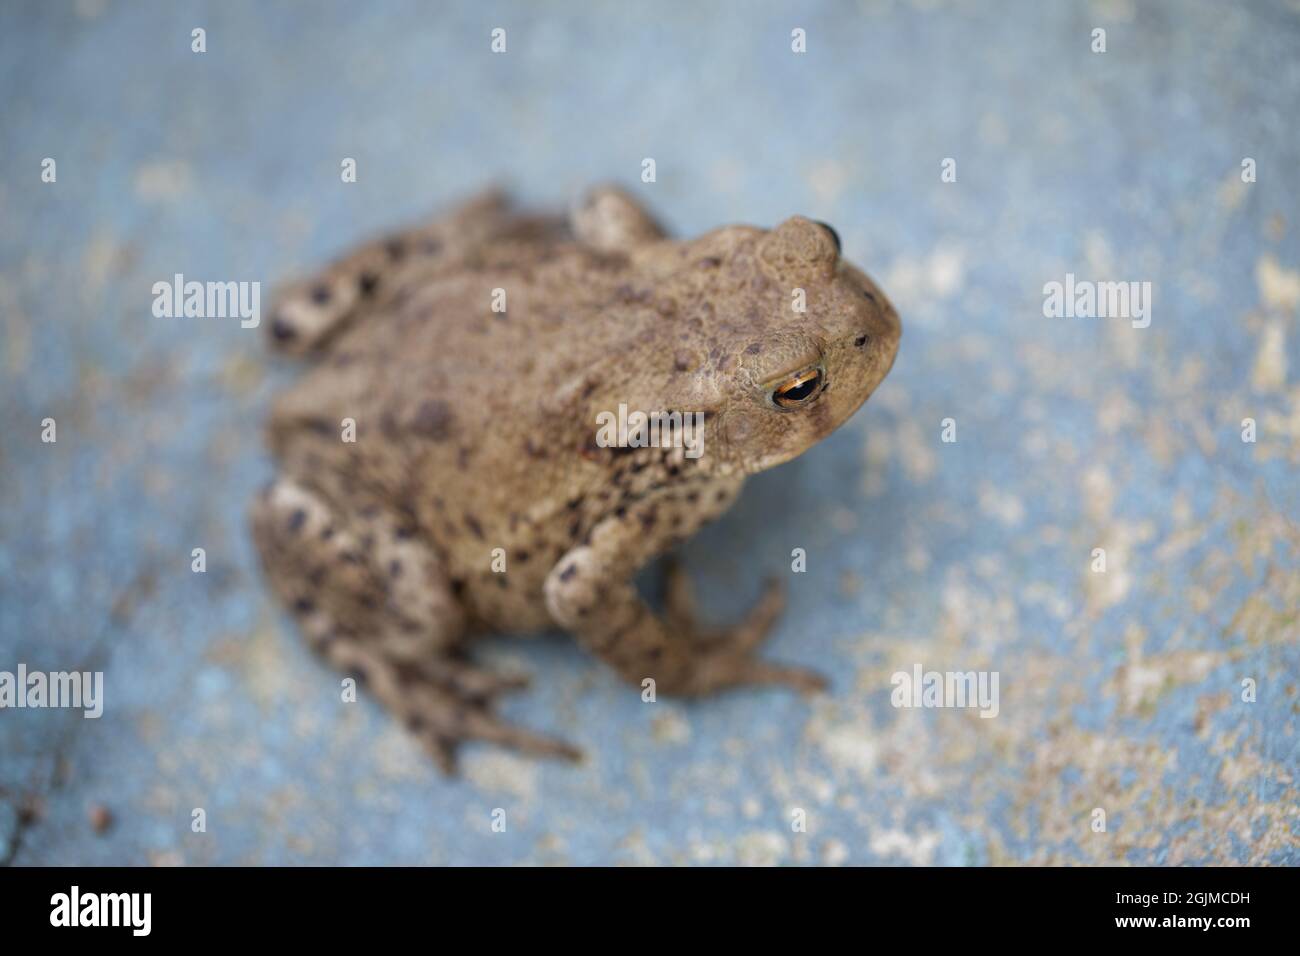 Common European Toad (Bufo bufo). On a house door step, early evening. Stock Photo